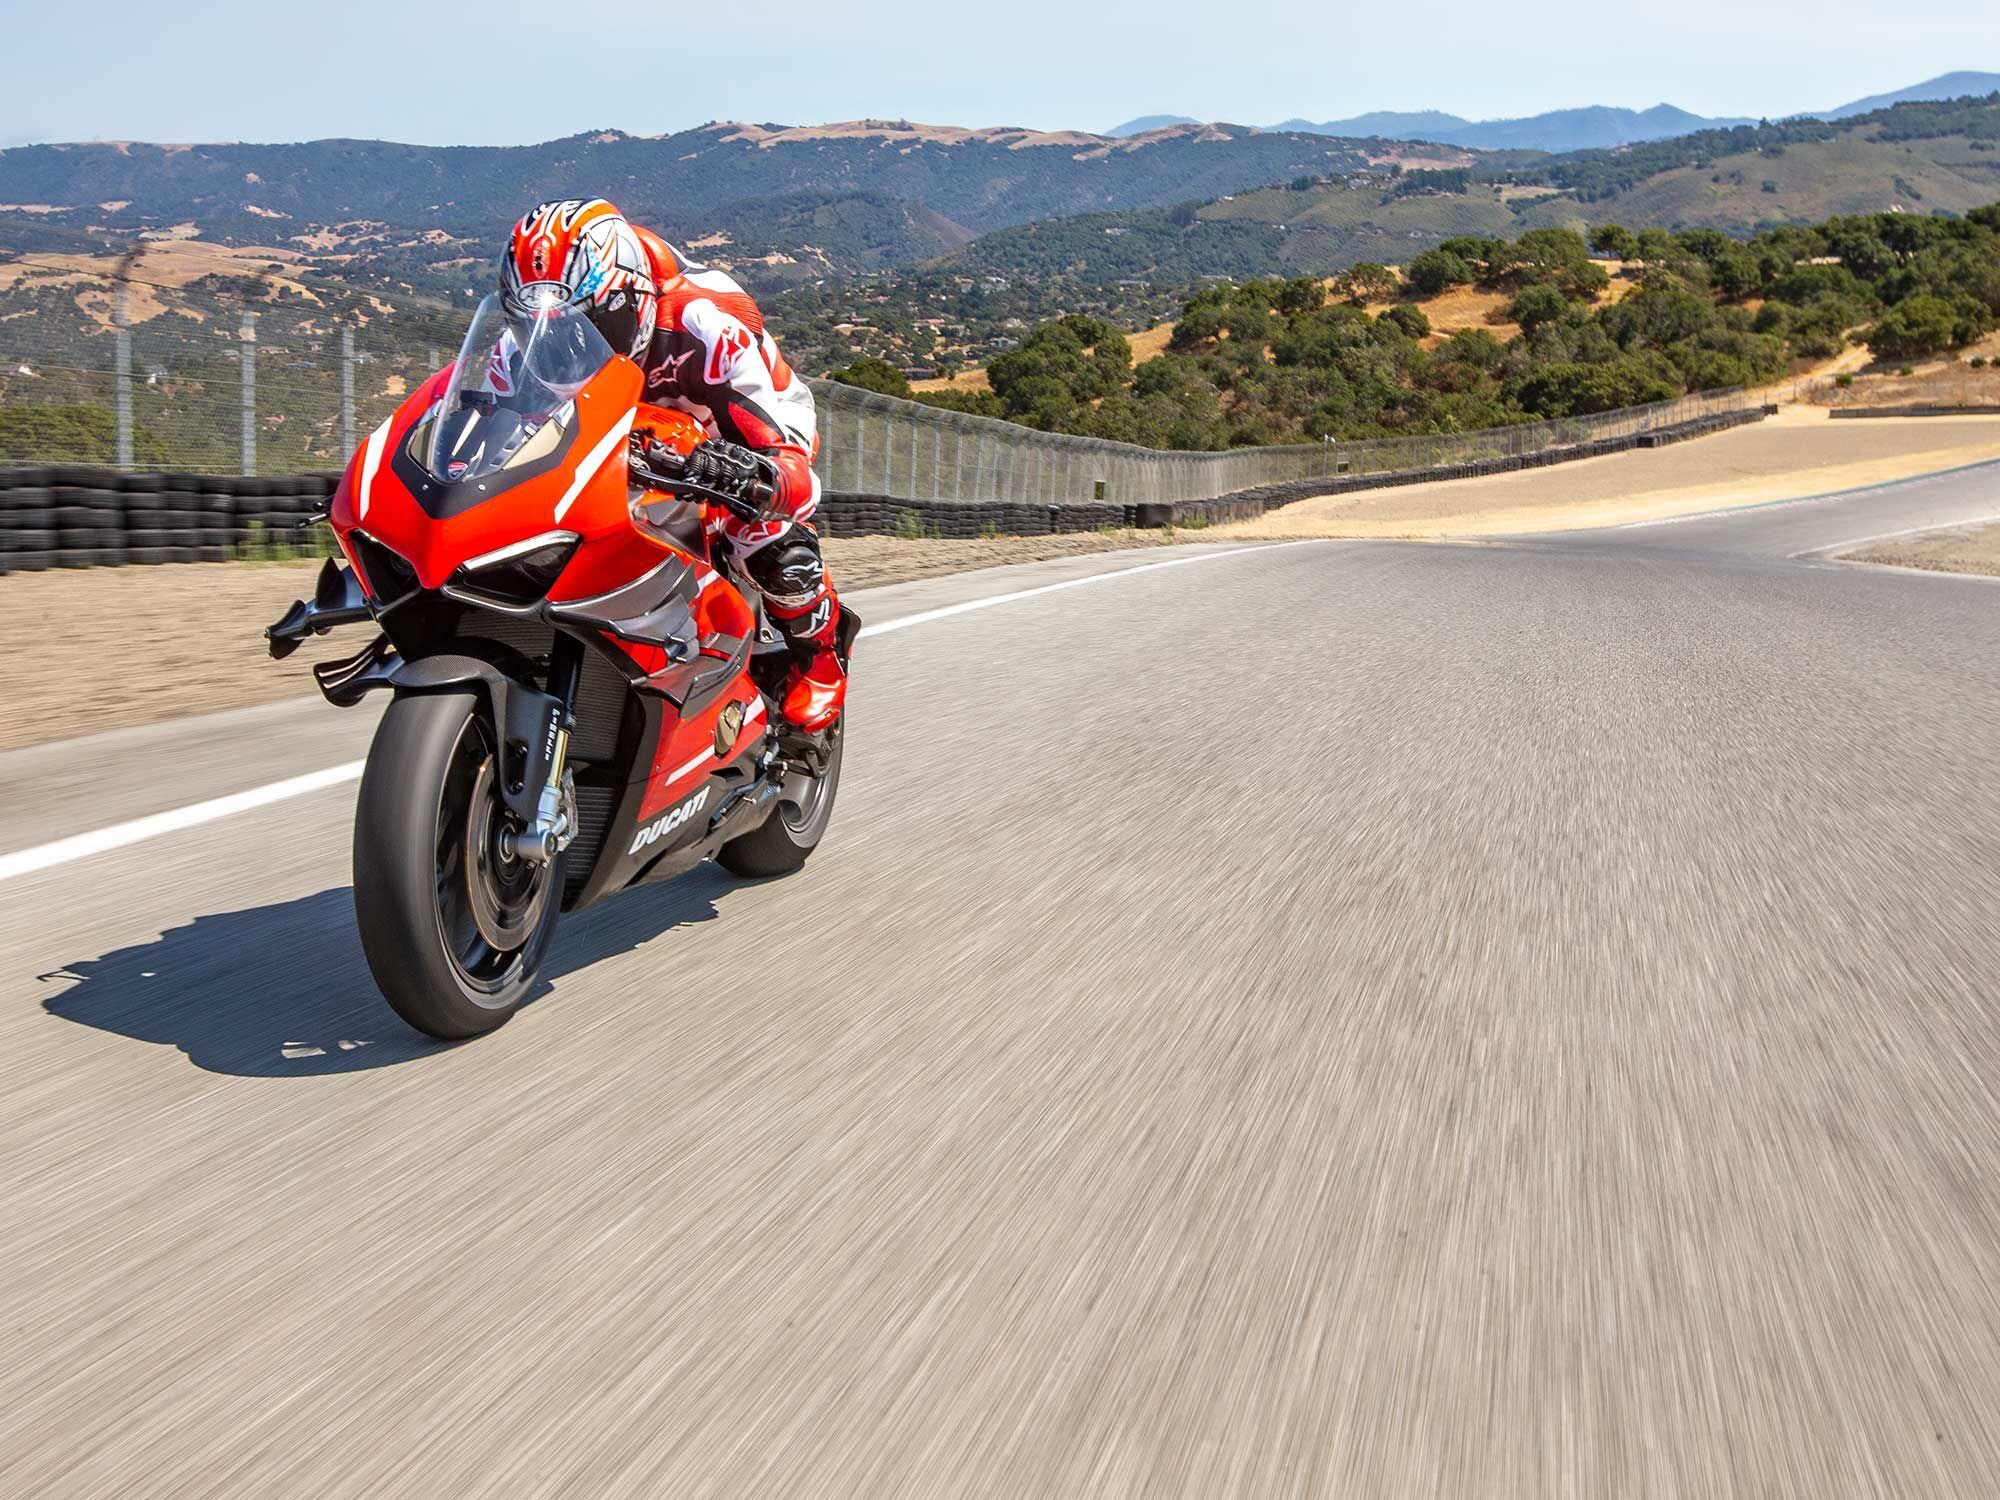 Laguna Seca’s dramatic elevation changes and challenging layout is a true test of the Superleggera’s performance and rideability.